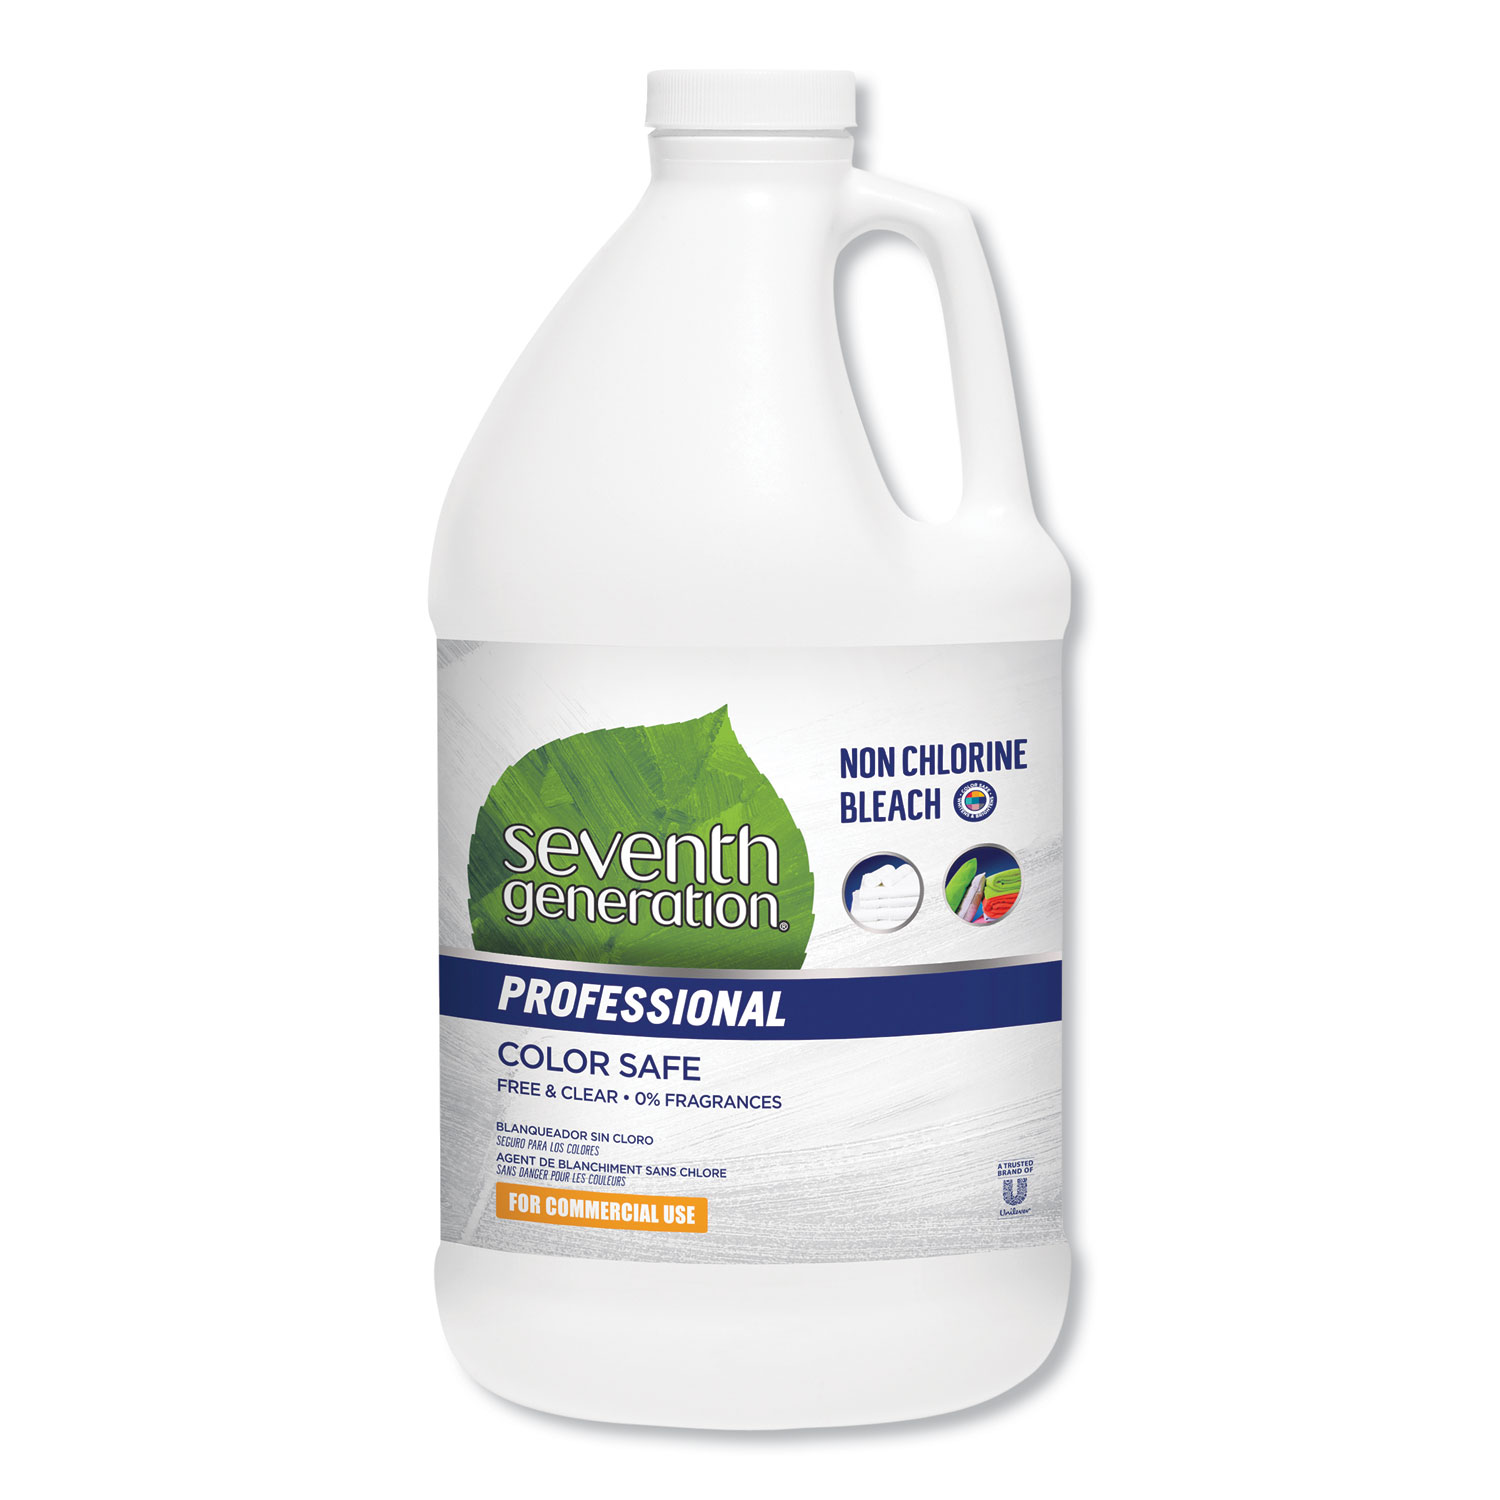  Seventh Generation Professional 44733CT Non Chlorine Bleach, Free and Clear, 21 Loads, 64 oz Bottle, 6/Carton (SEV44733CT) 